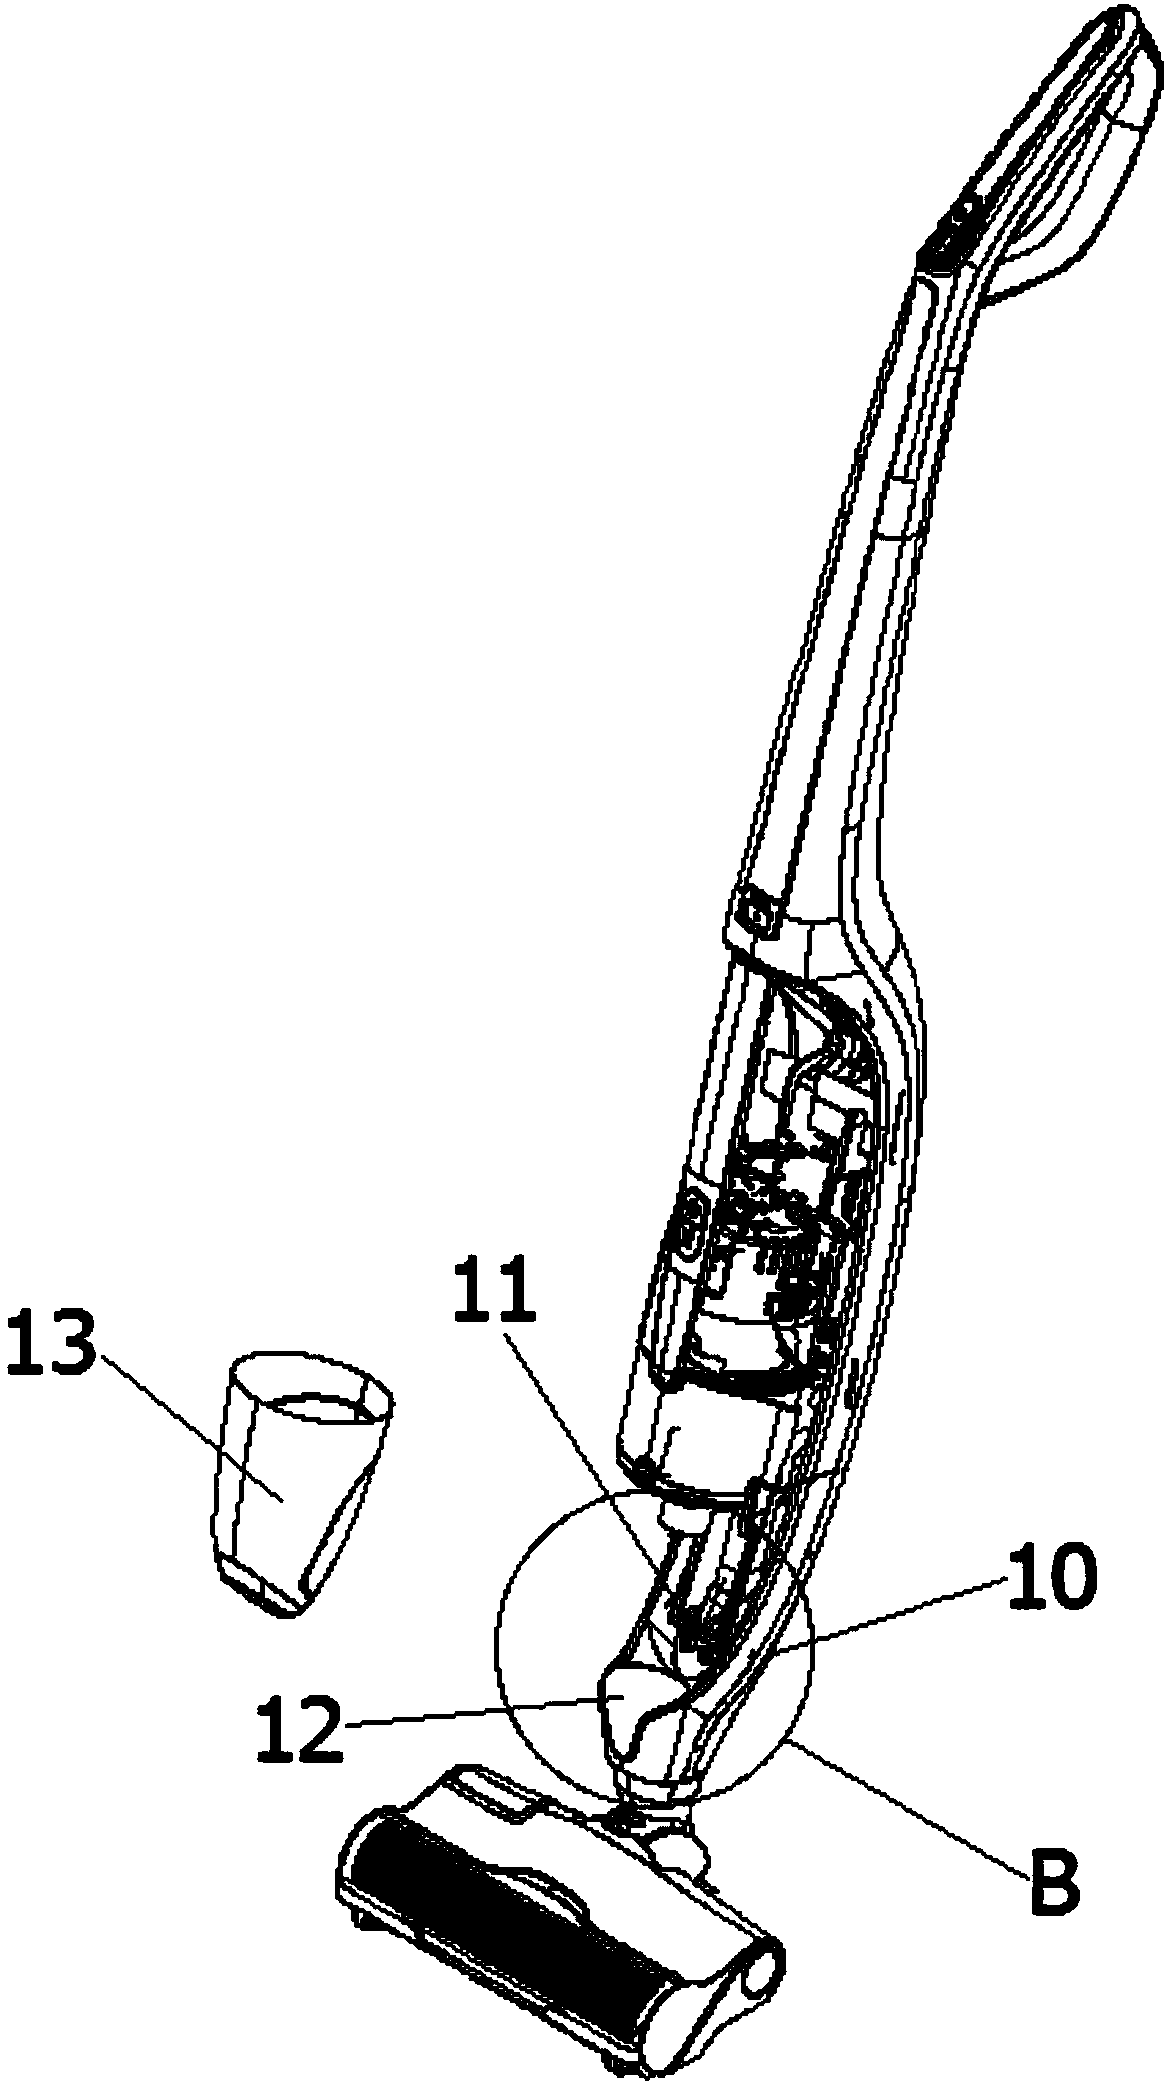 Frame structure of hand-held vacuum cleaner and hand-held vacuum cleaner